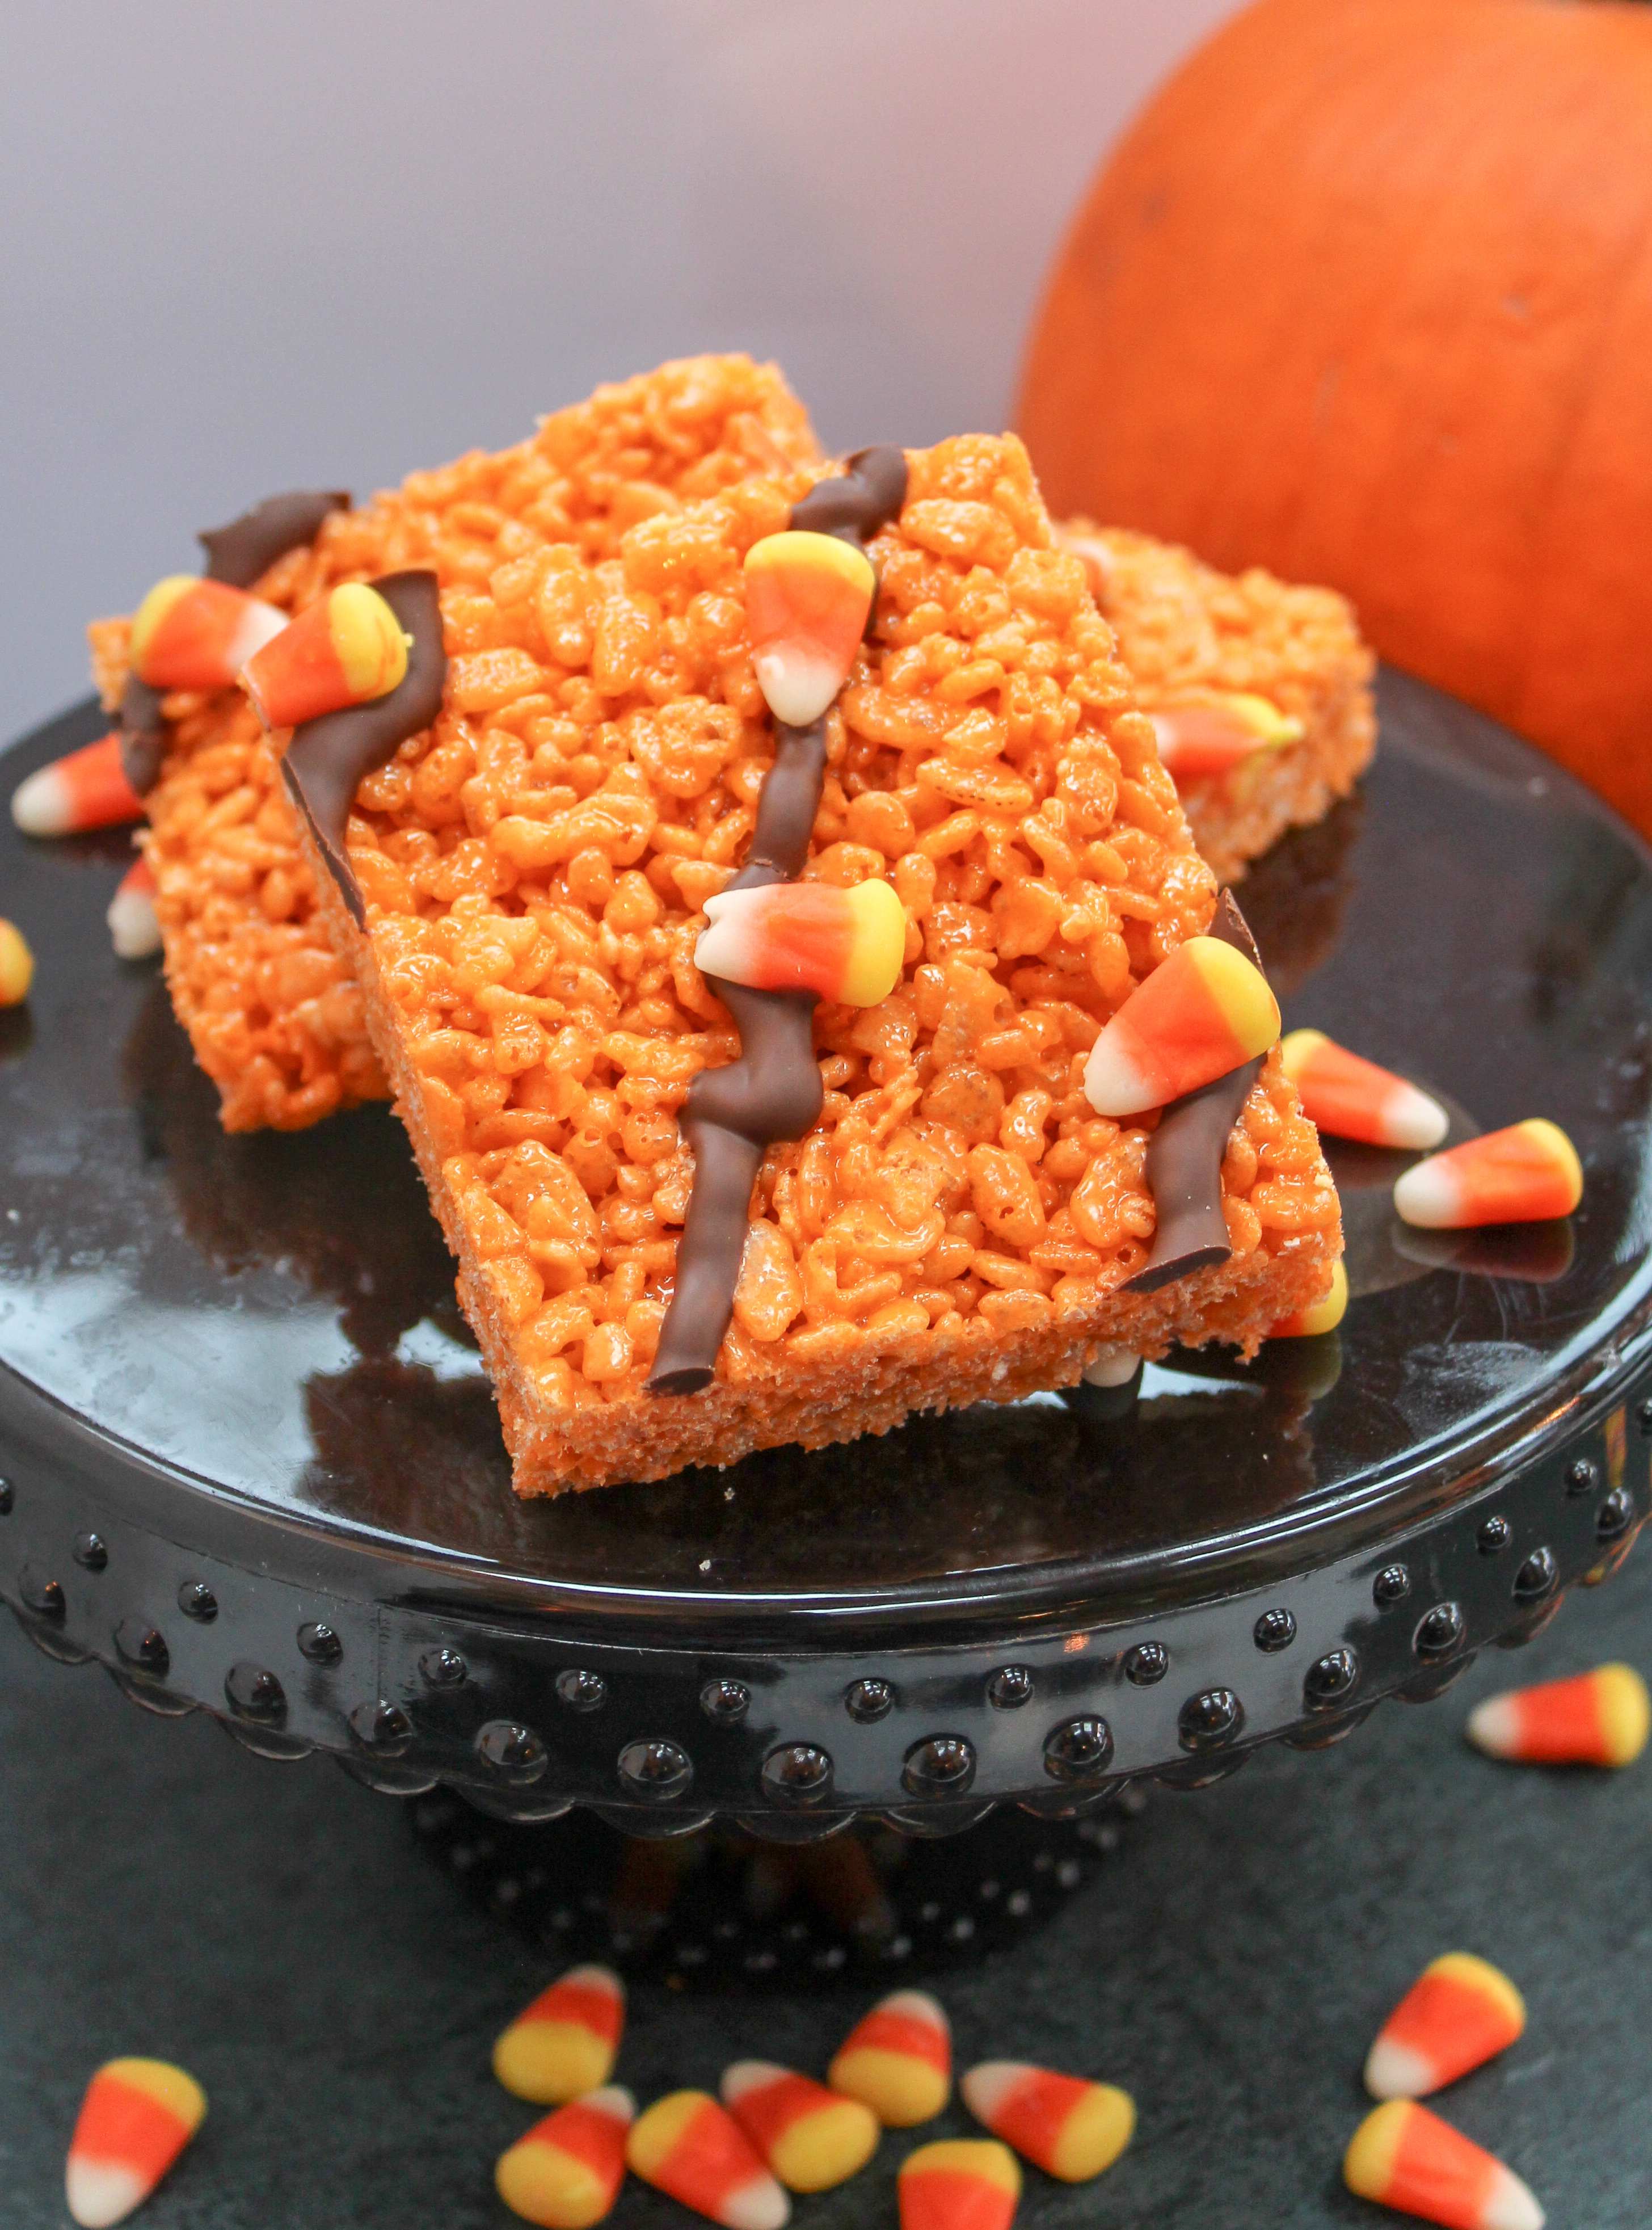 Rice Crispy Cereal cut into squares. Garnished with Candy Corn and Chocolate